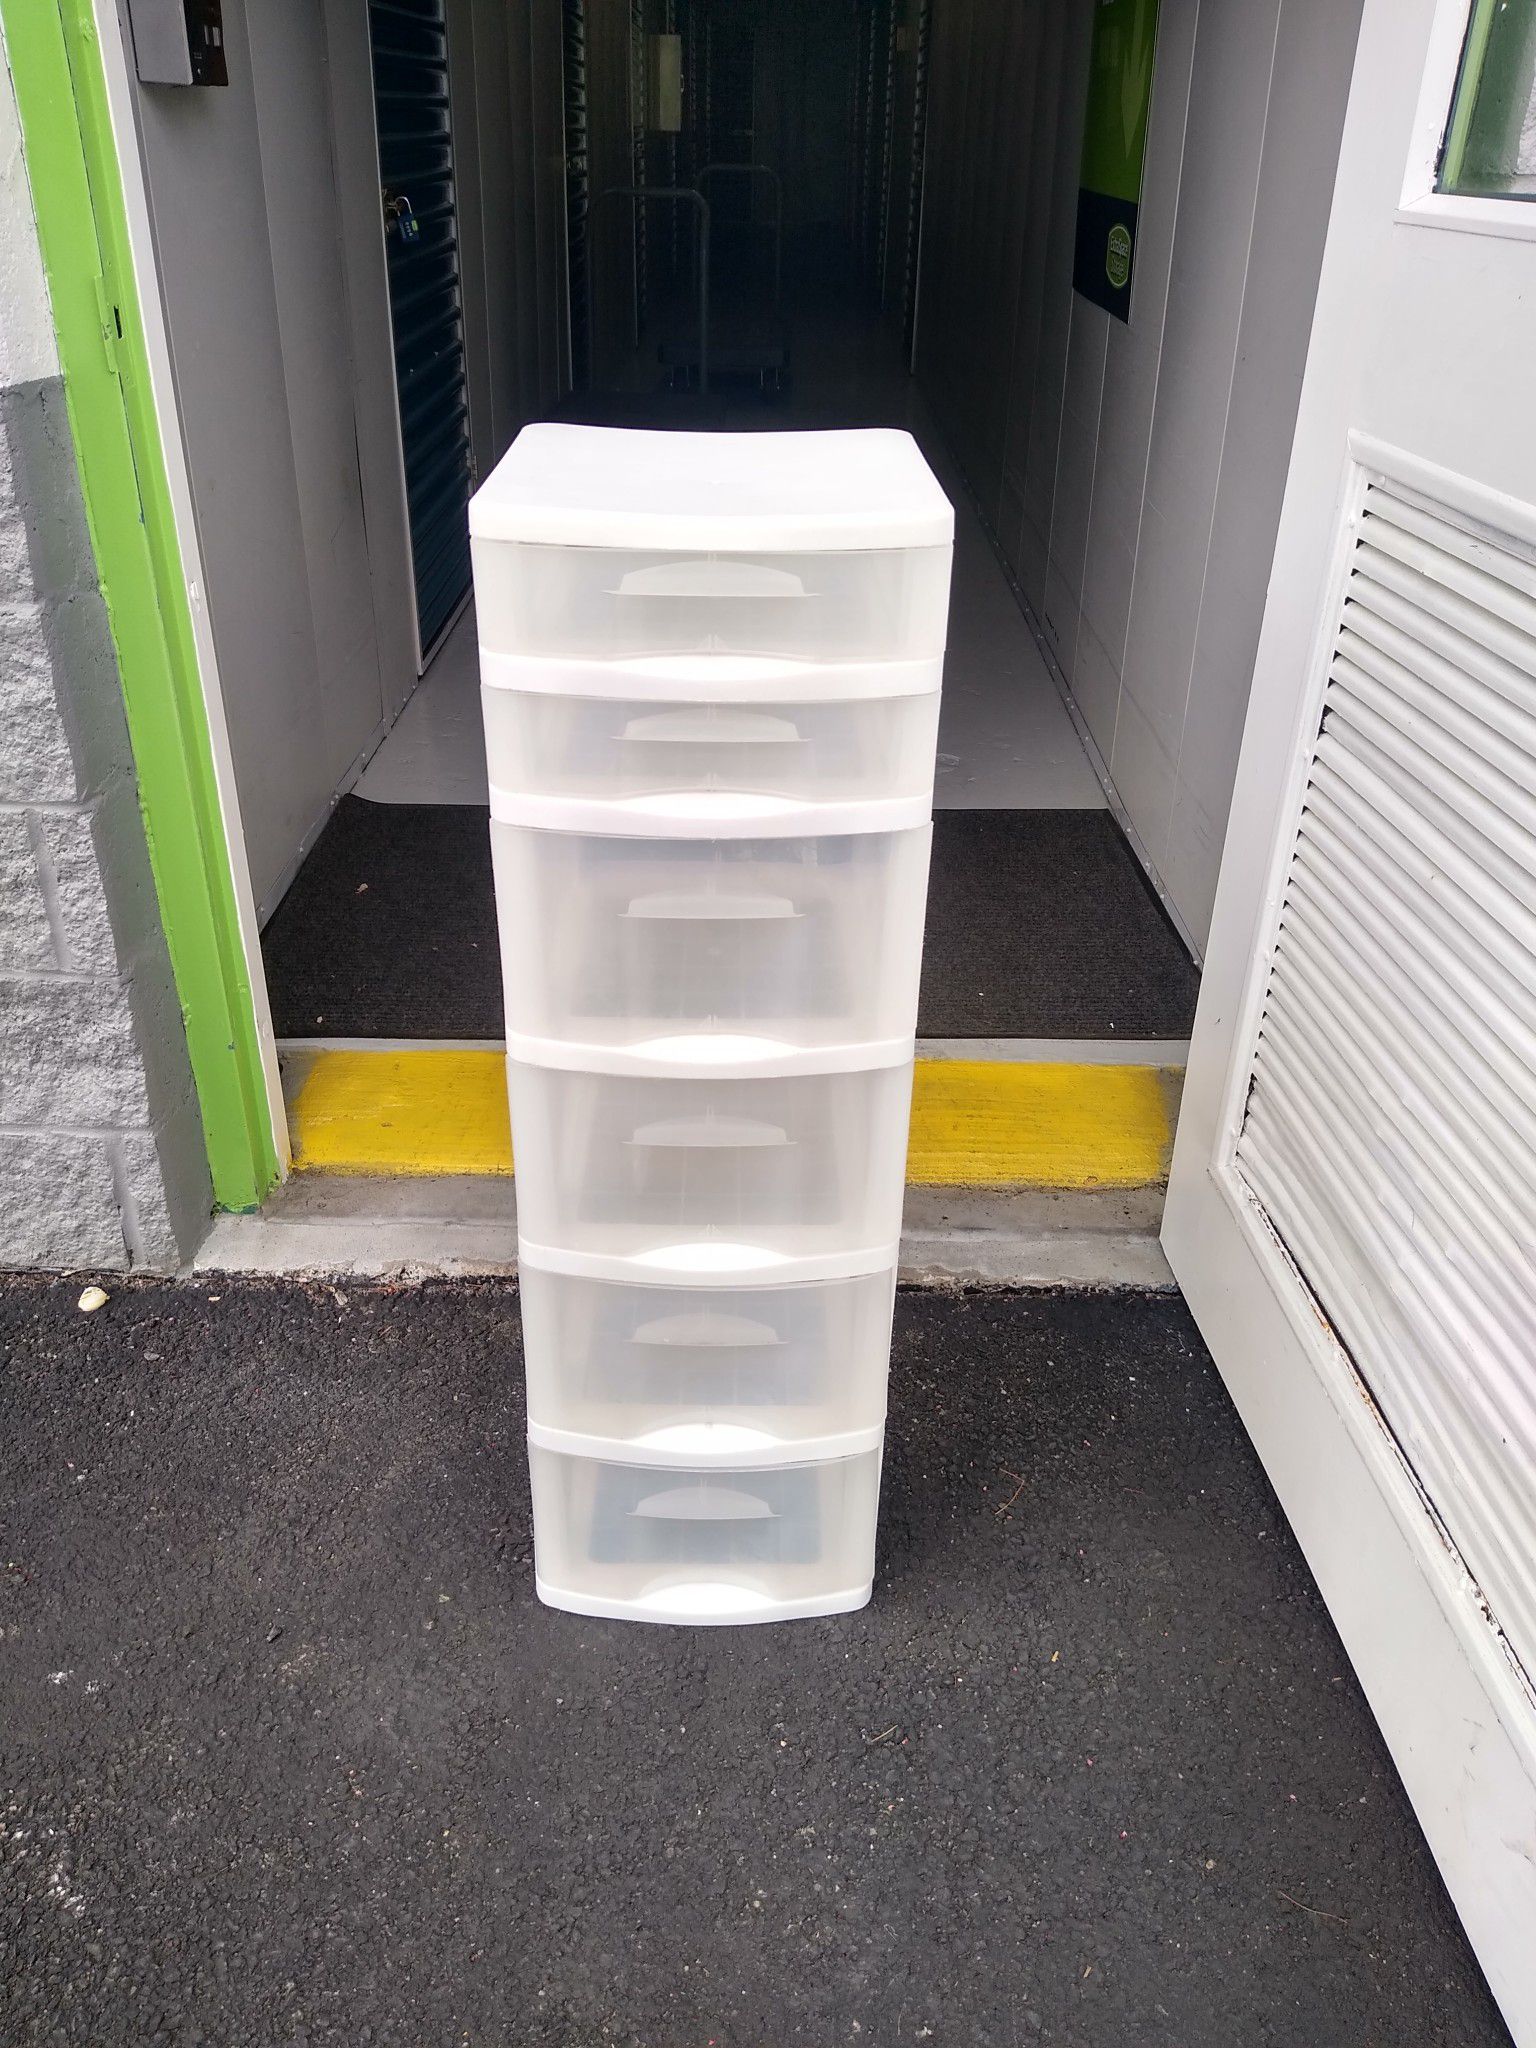 Used plastic storage container 6 drawers $20 or offer does not have wheels